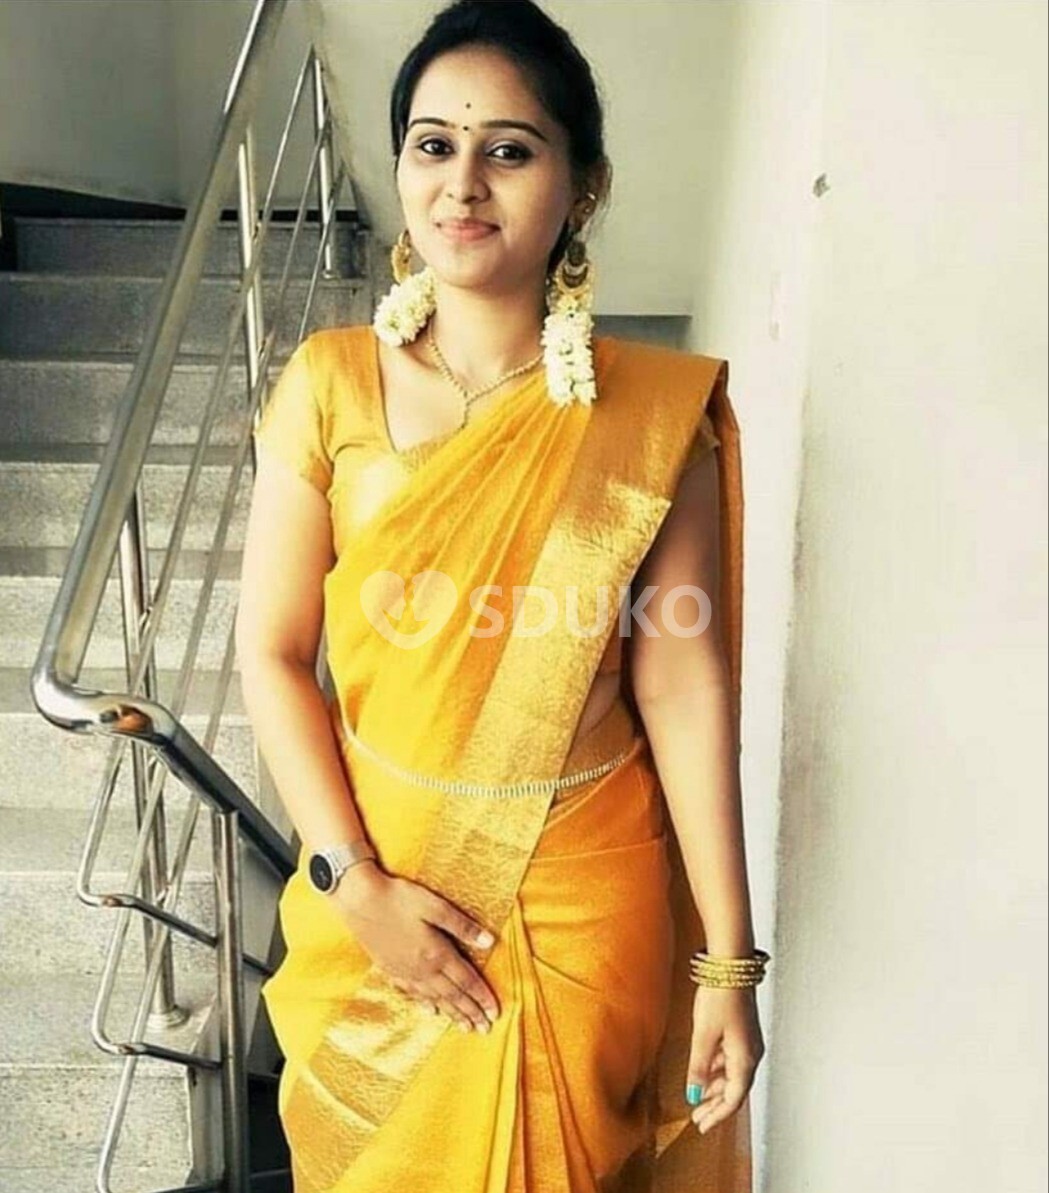 TIRUPATI 💙🔥TODAY LOW PRICE UNLIMITED SHOOT 100% GENUINE SEXY VIP CALL GIRLS ARE PROVIDED SECURE SERVICE 💙 CALL 